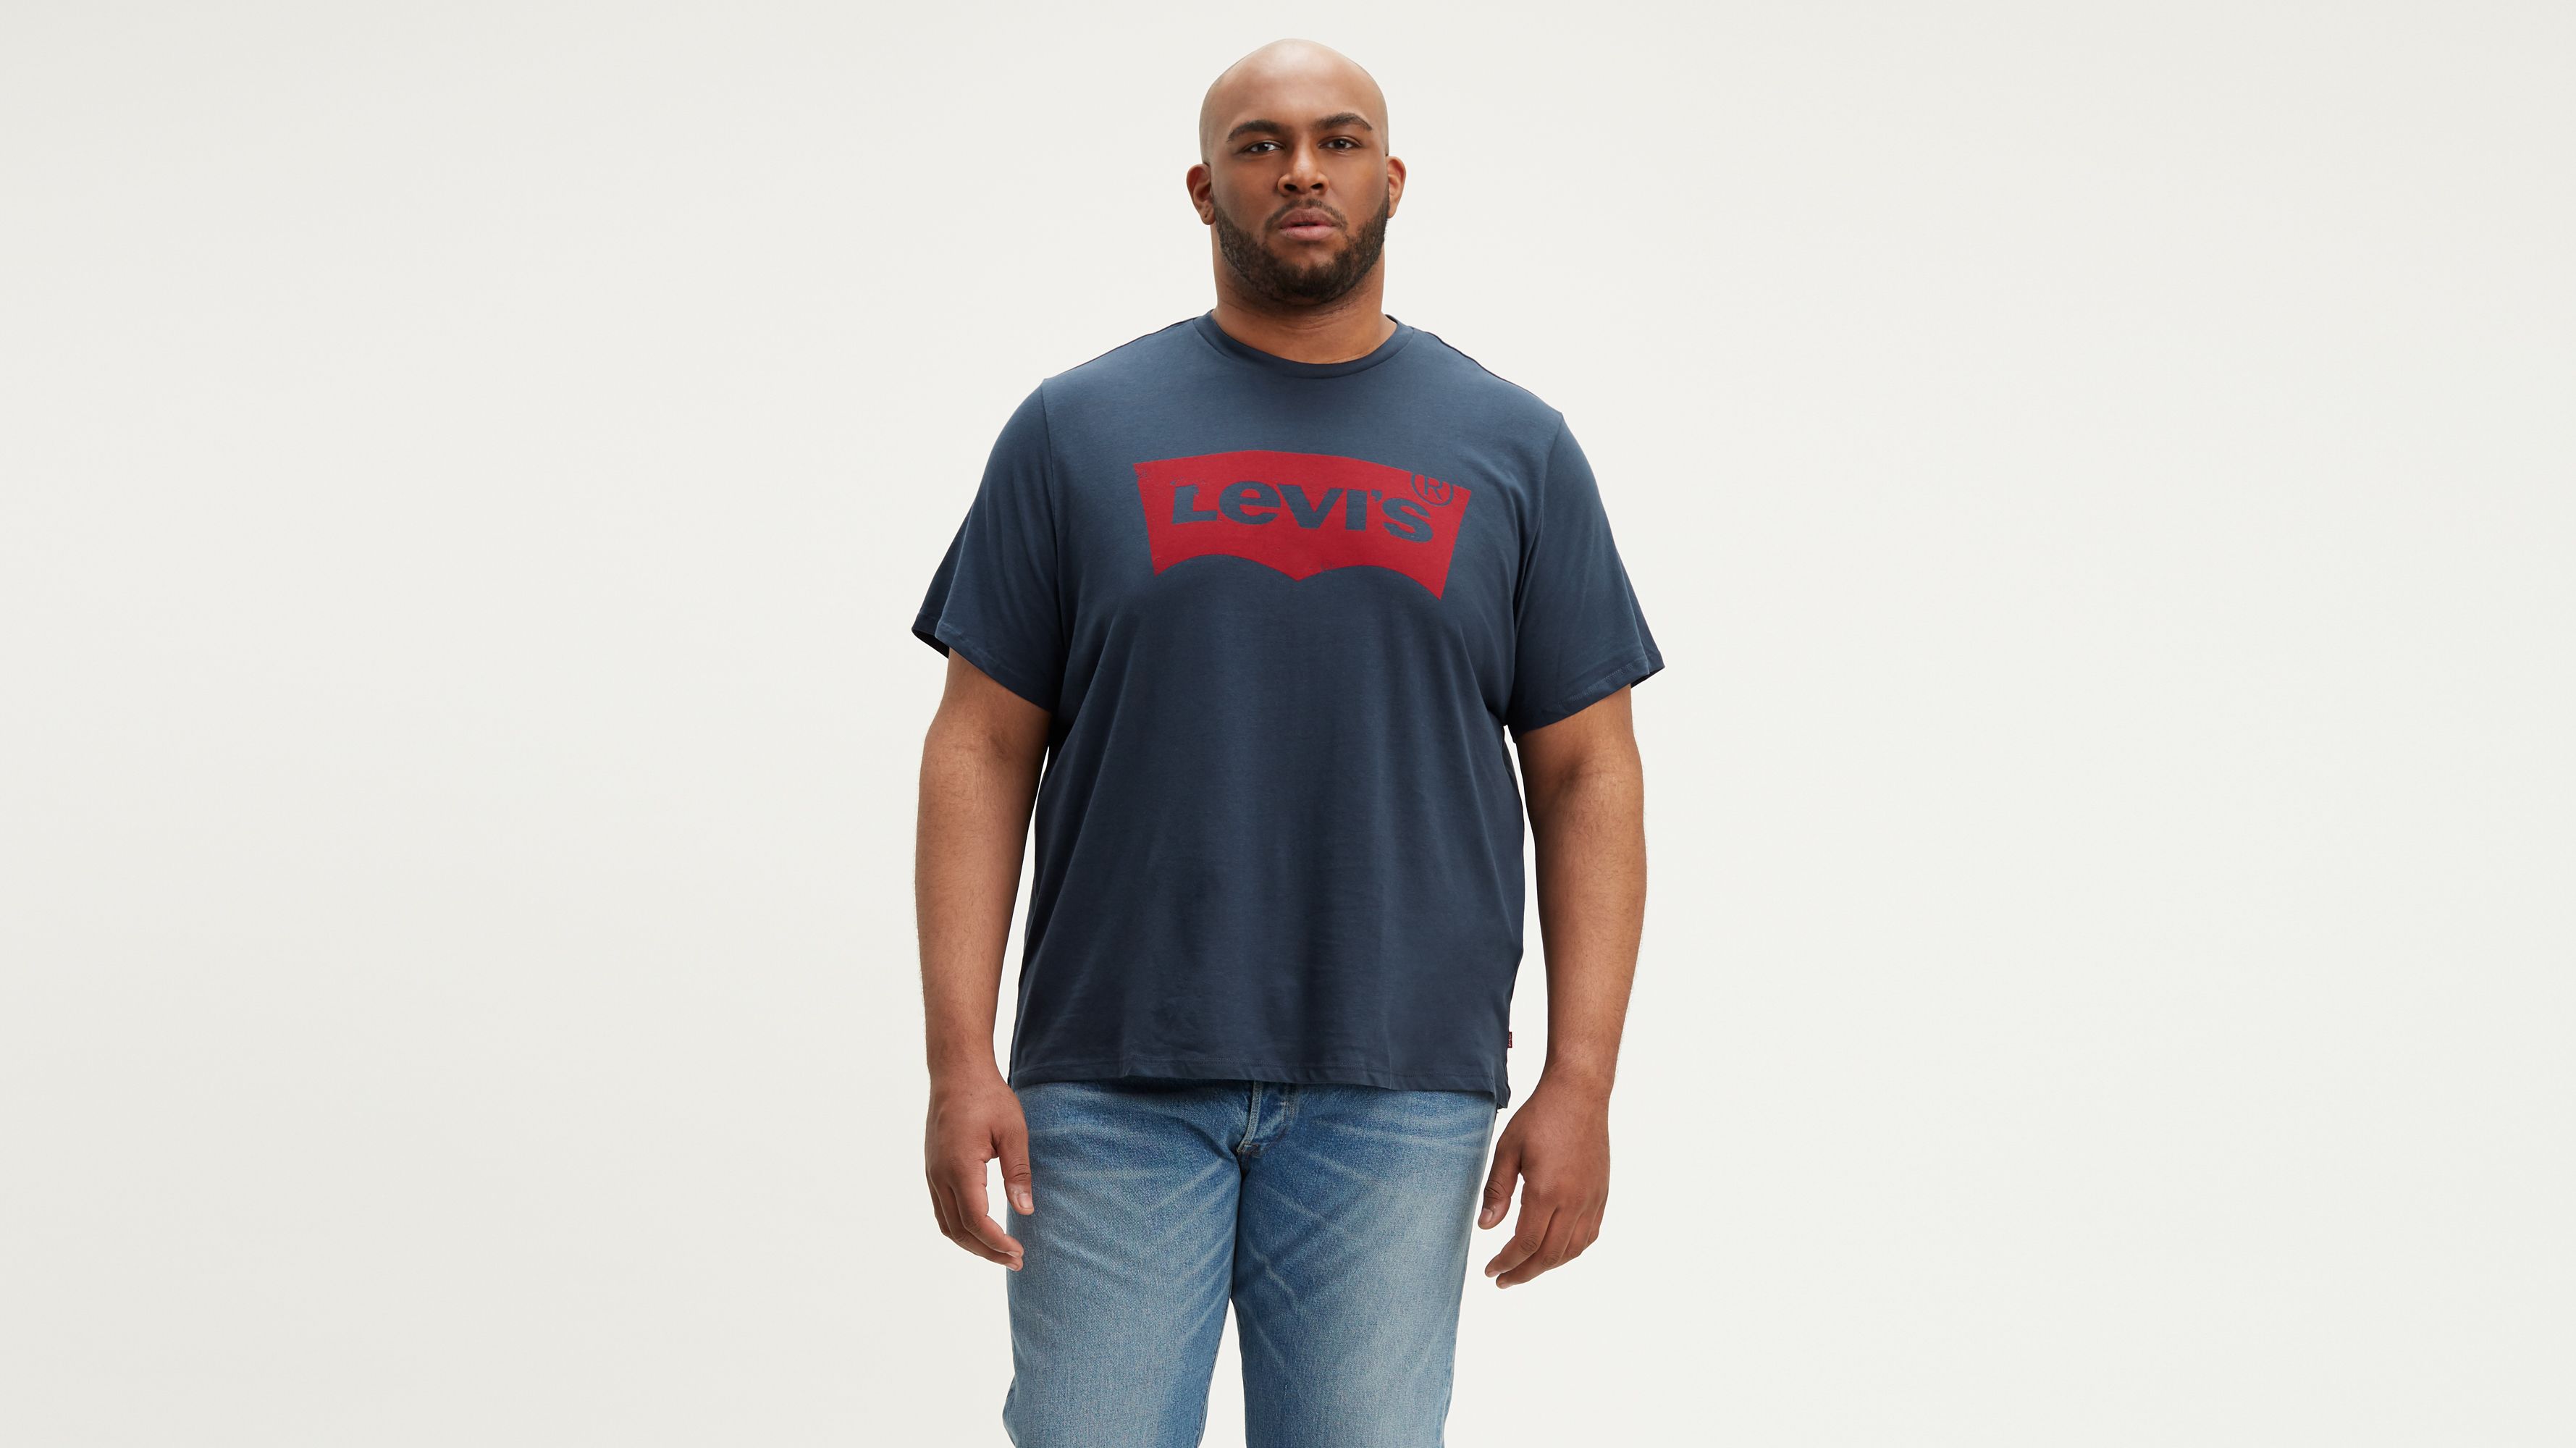 levis for fat guys